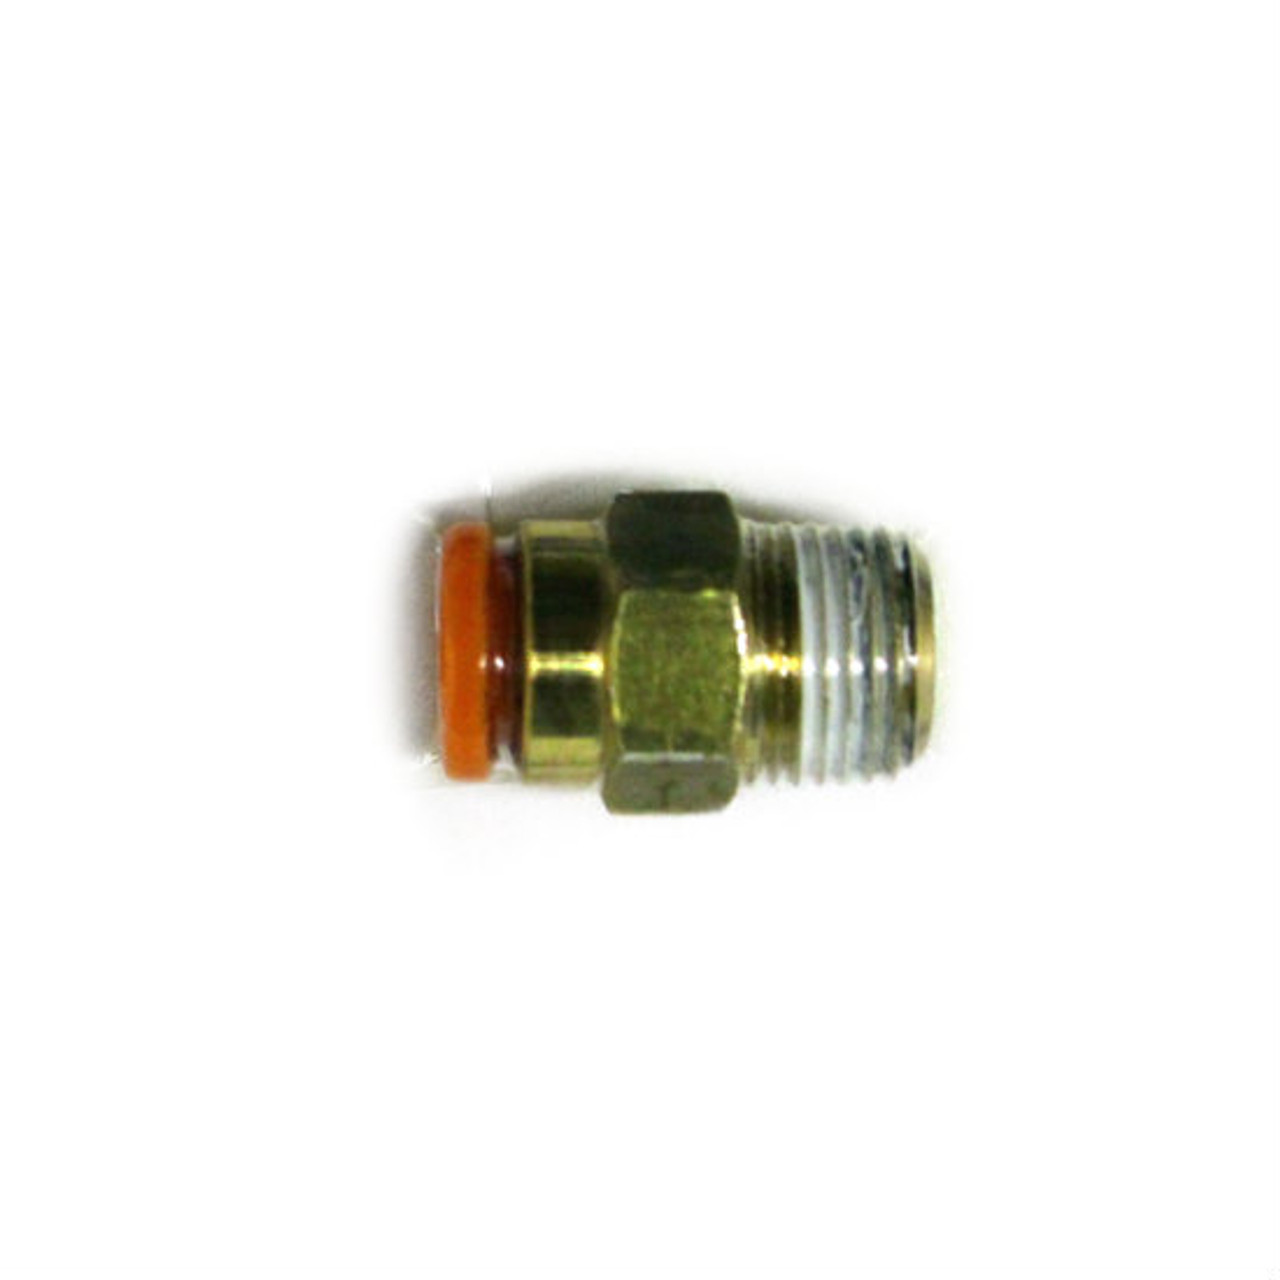 Schnitz Fitting Brass Quick Connect 1/8" NPT Male to 1/4" Line